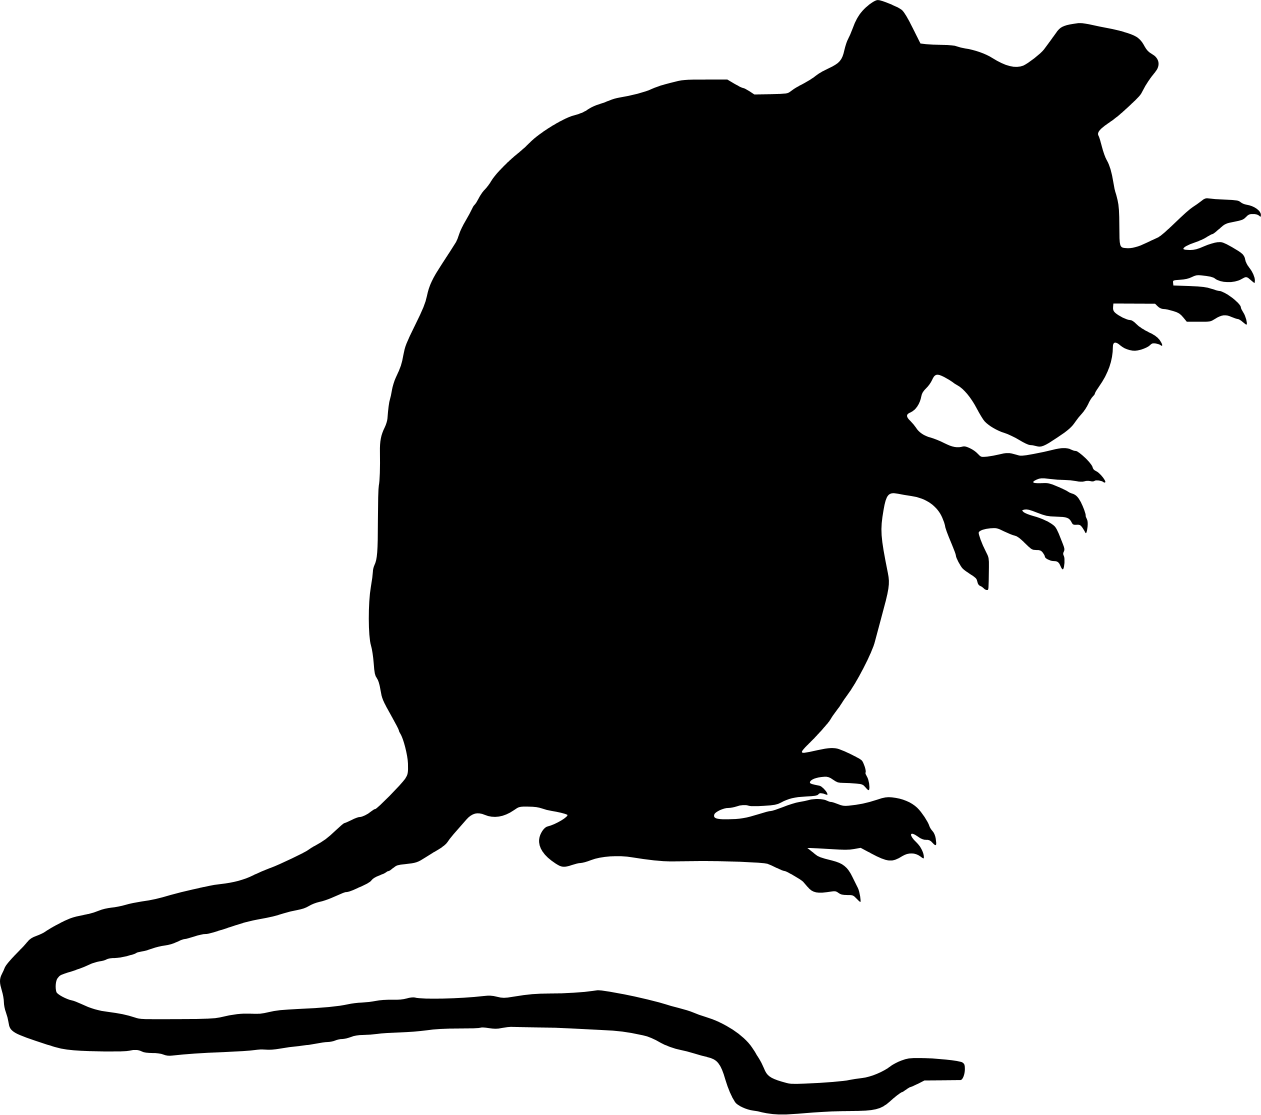 Rat Silhouette Vector - Clipart library